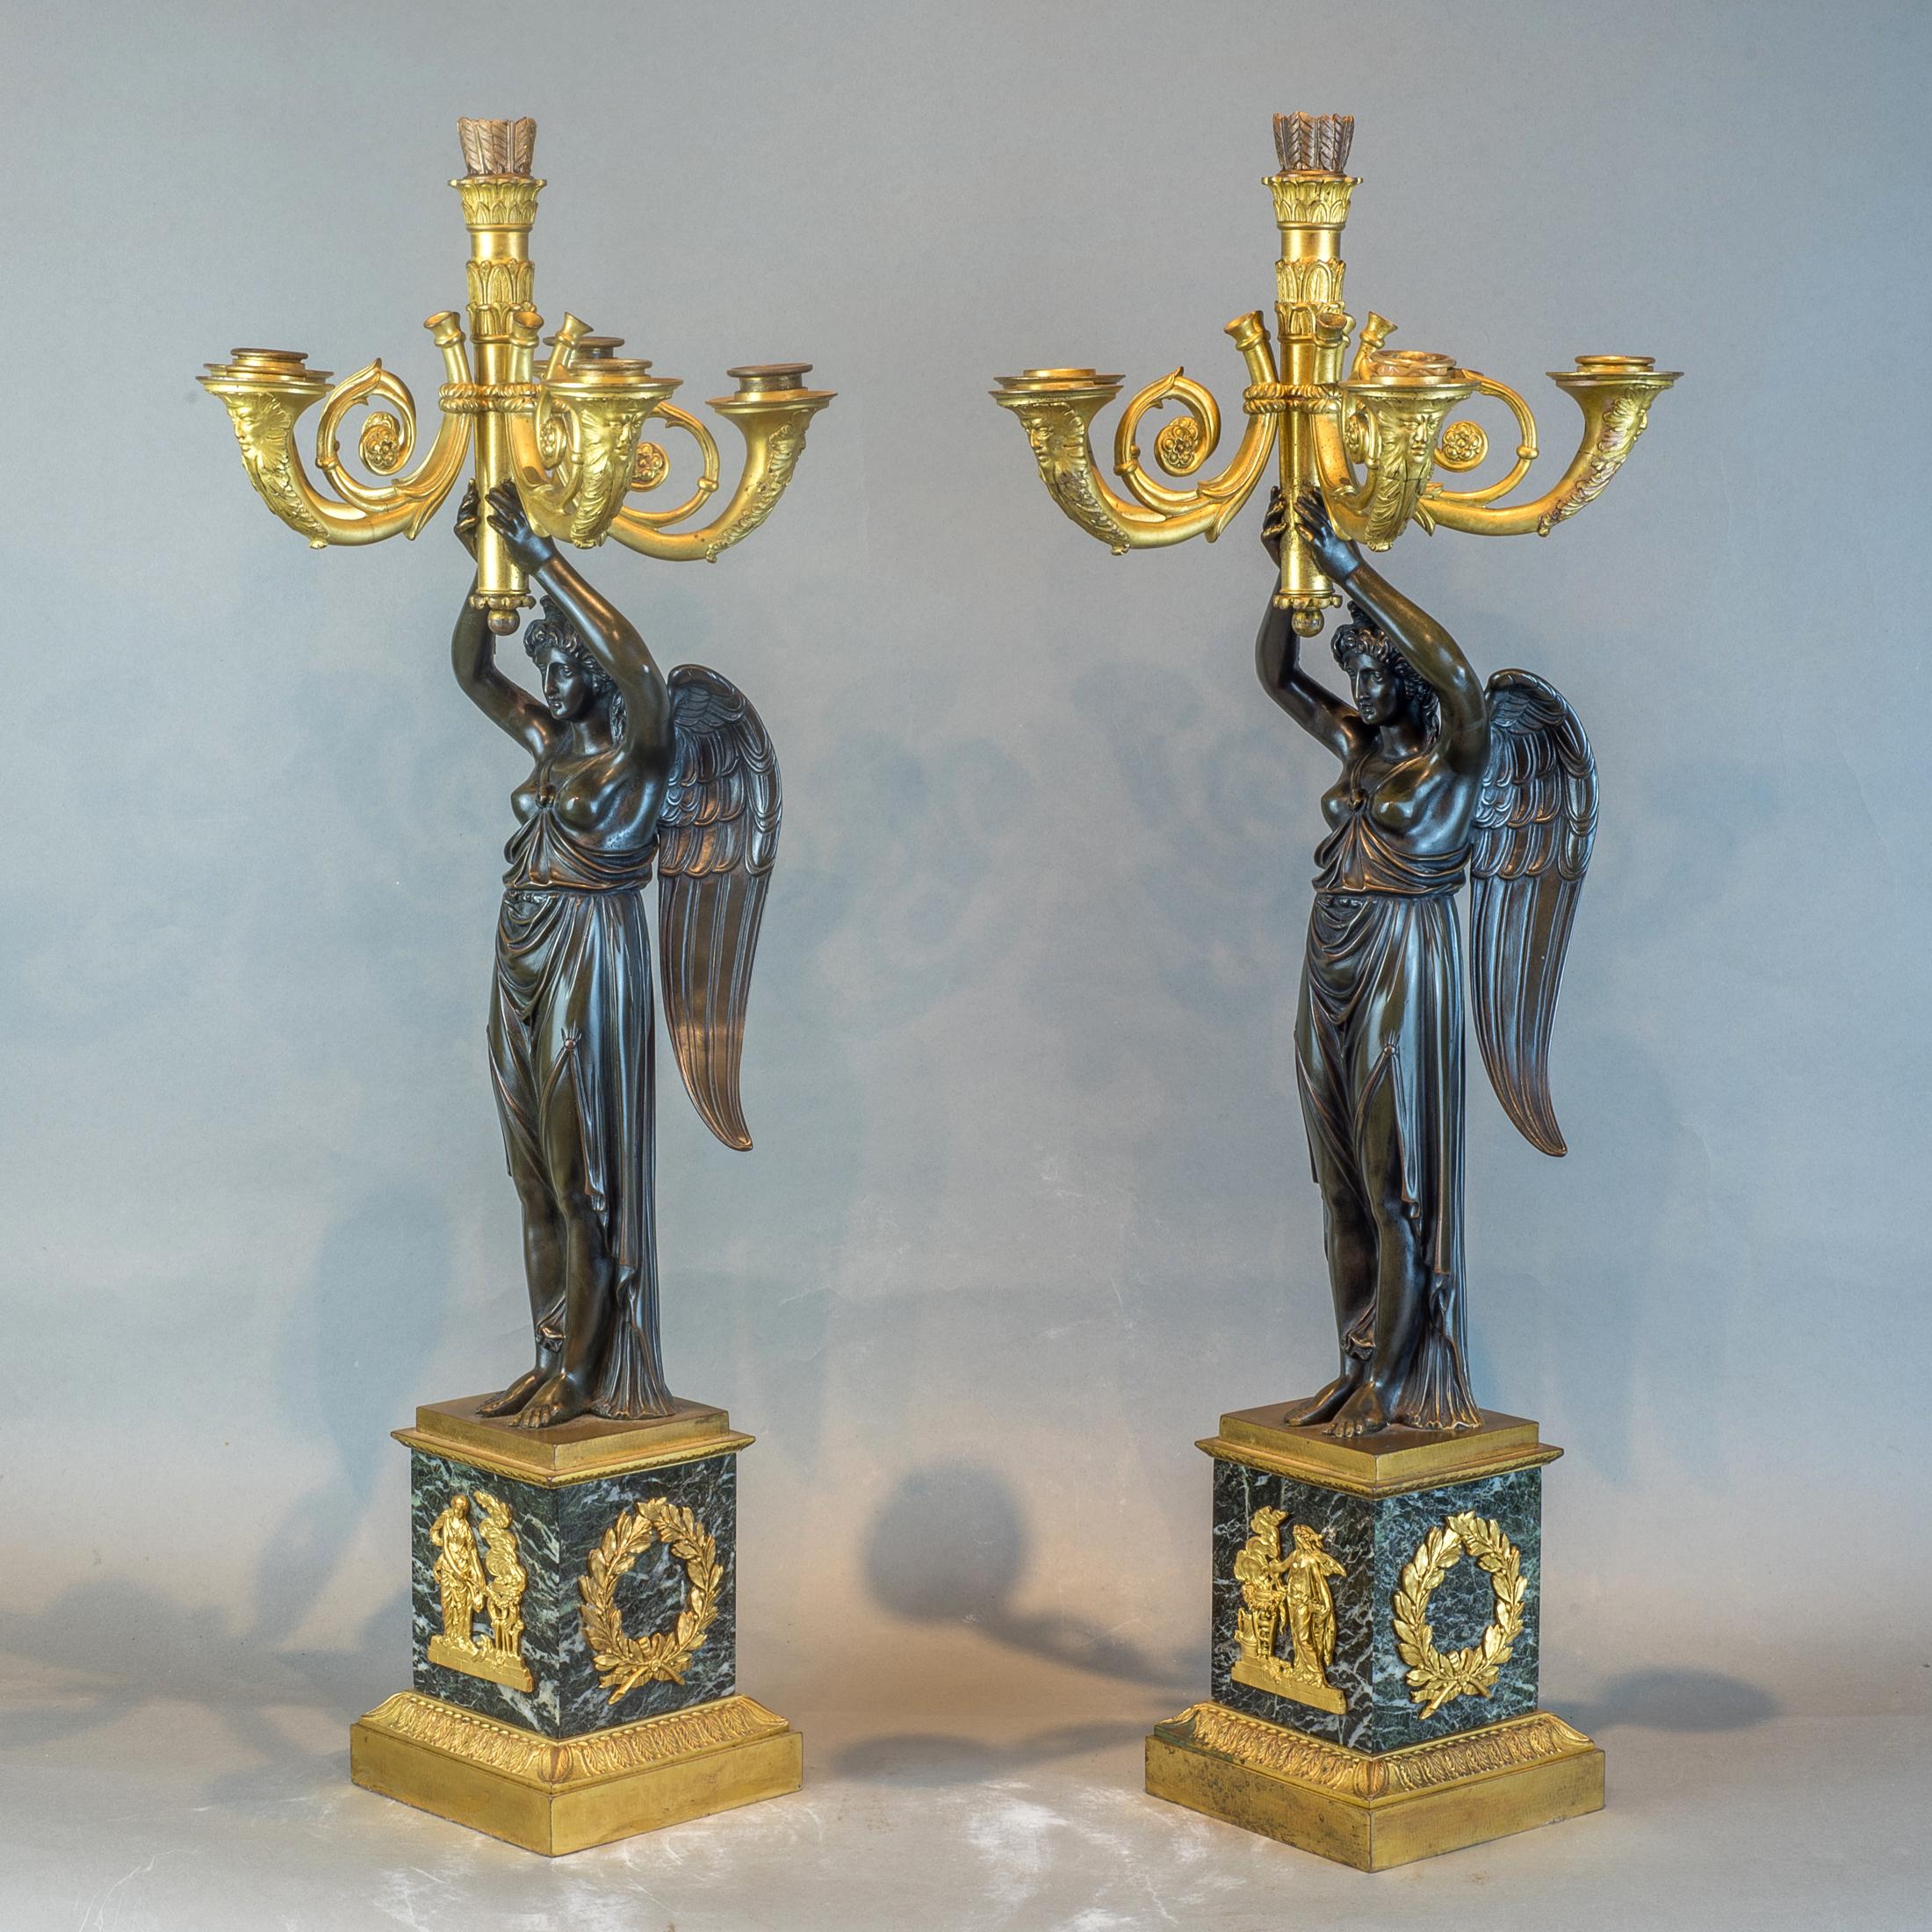 A fine pair of Empire gilt and patinated bronze, six-light figural candelabras suspended by a winged maiden on top an antique verde marble square gilt plinth.

Origin: French
Date: circa 1880
Size: 25 in. x 10 1/2 in.